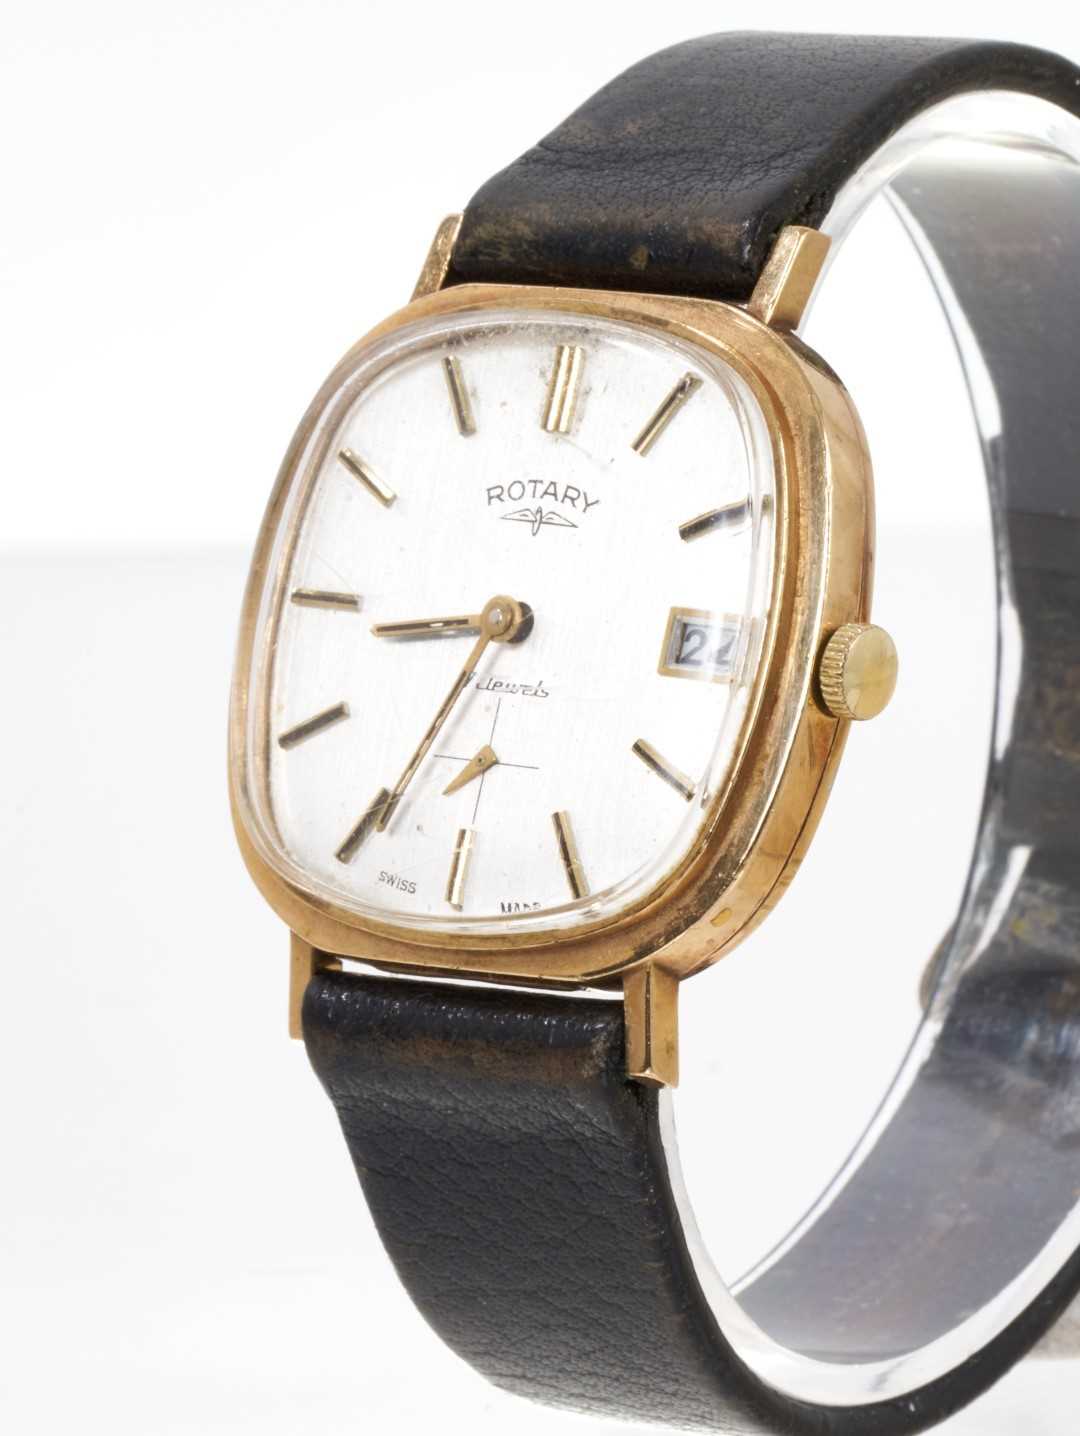 Gentlemen's 1970s Rotary 9ct gold wristwatch with 17 jewel movement - Image 2 of 4